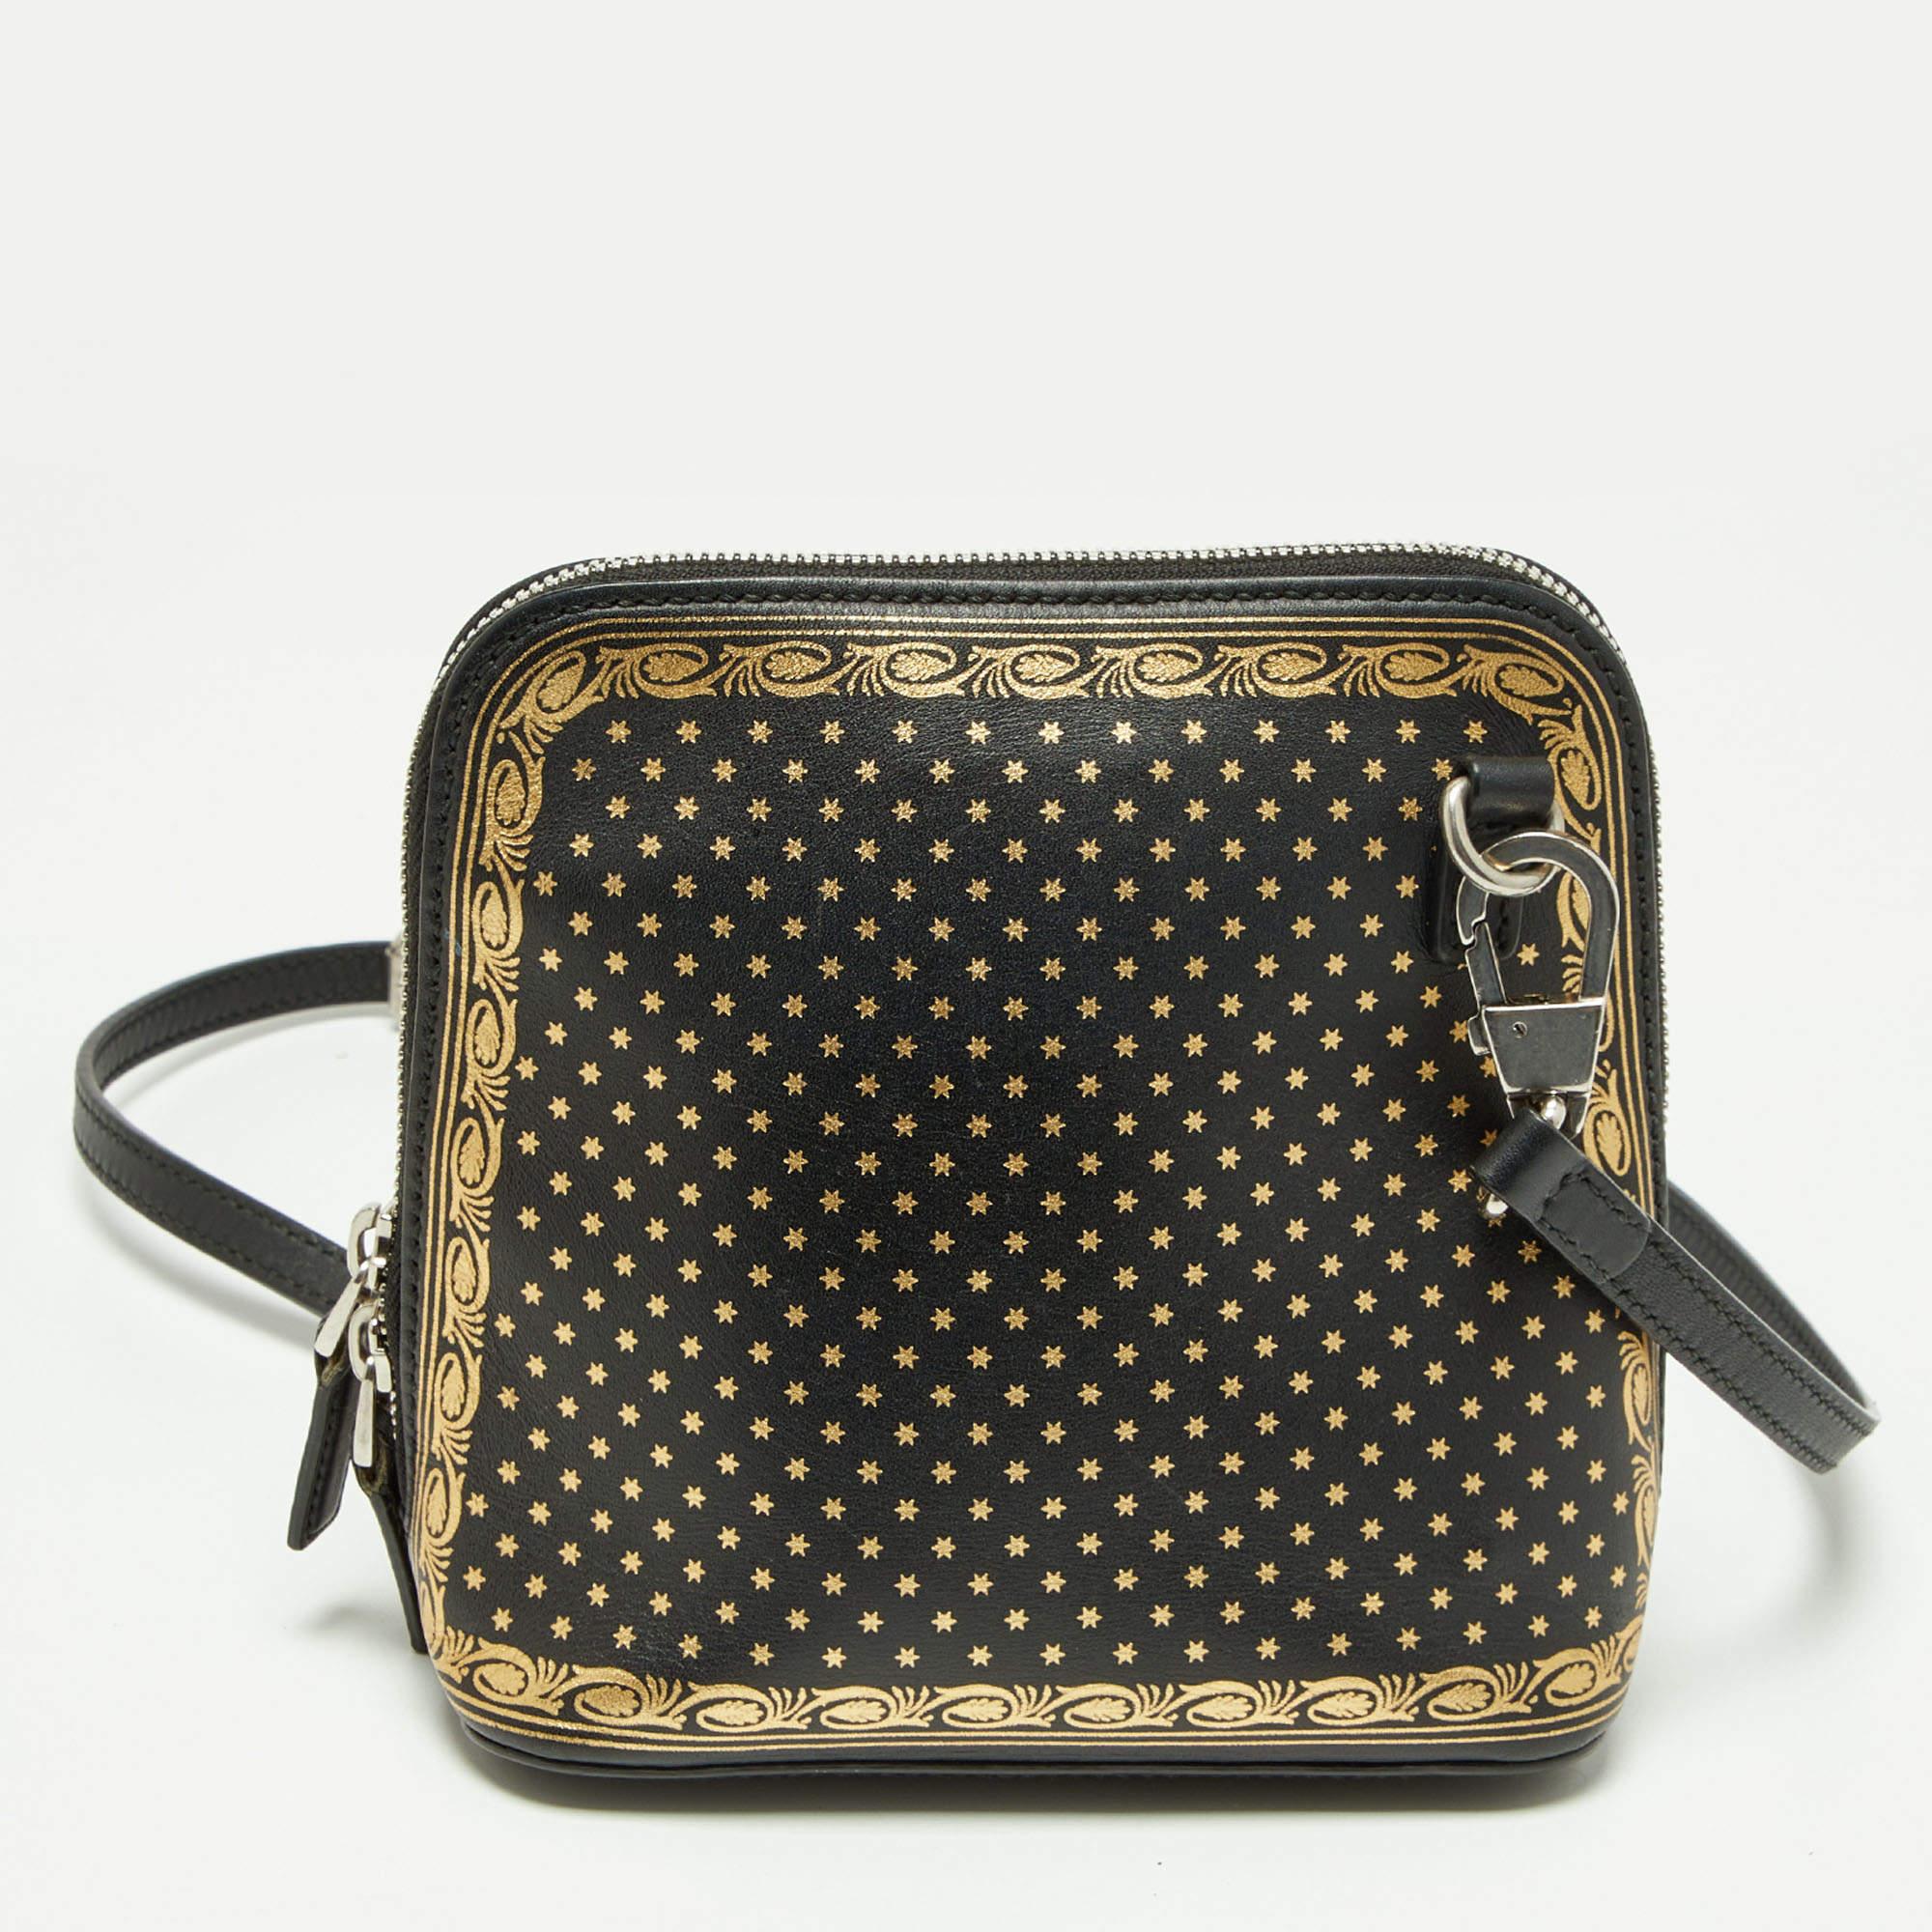 Large Studded Saffiano Leather Dome Crossbody Bag